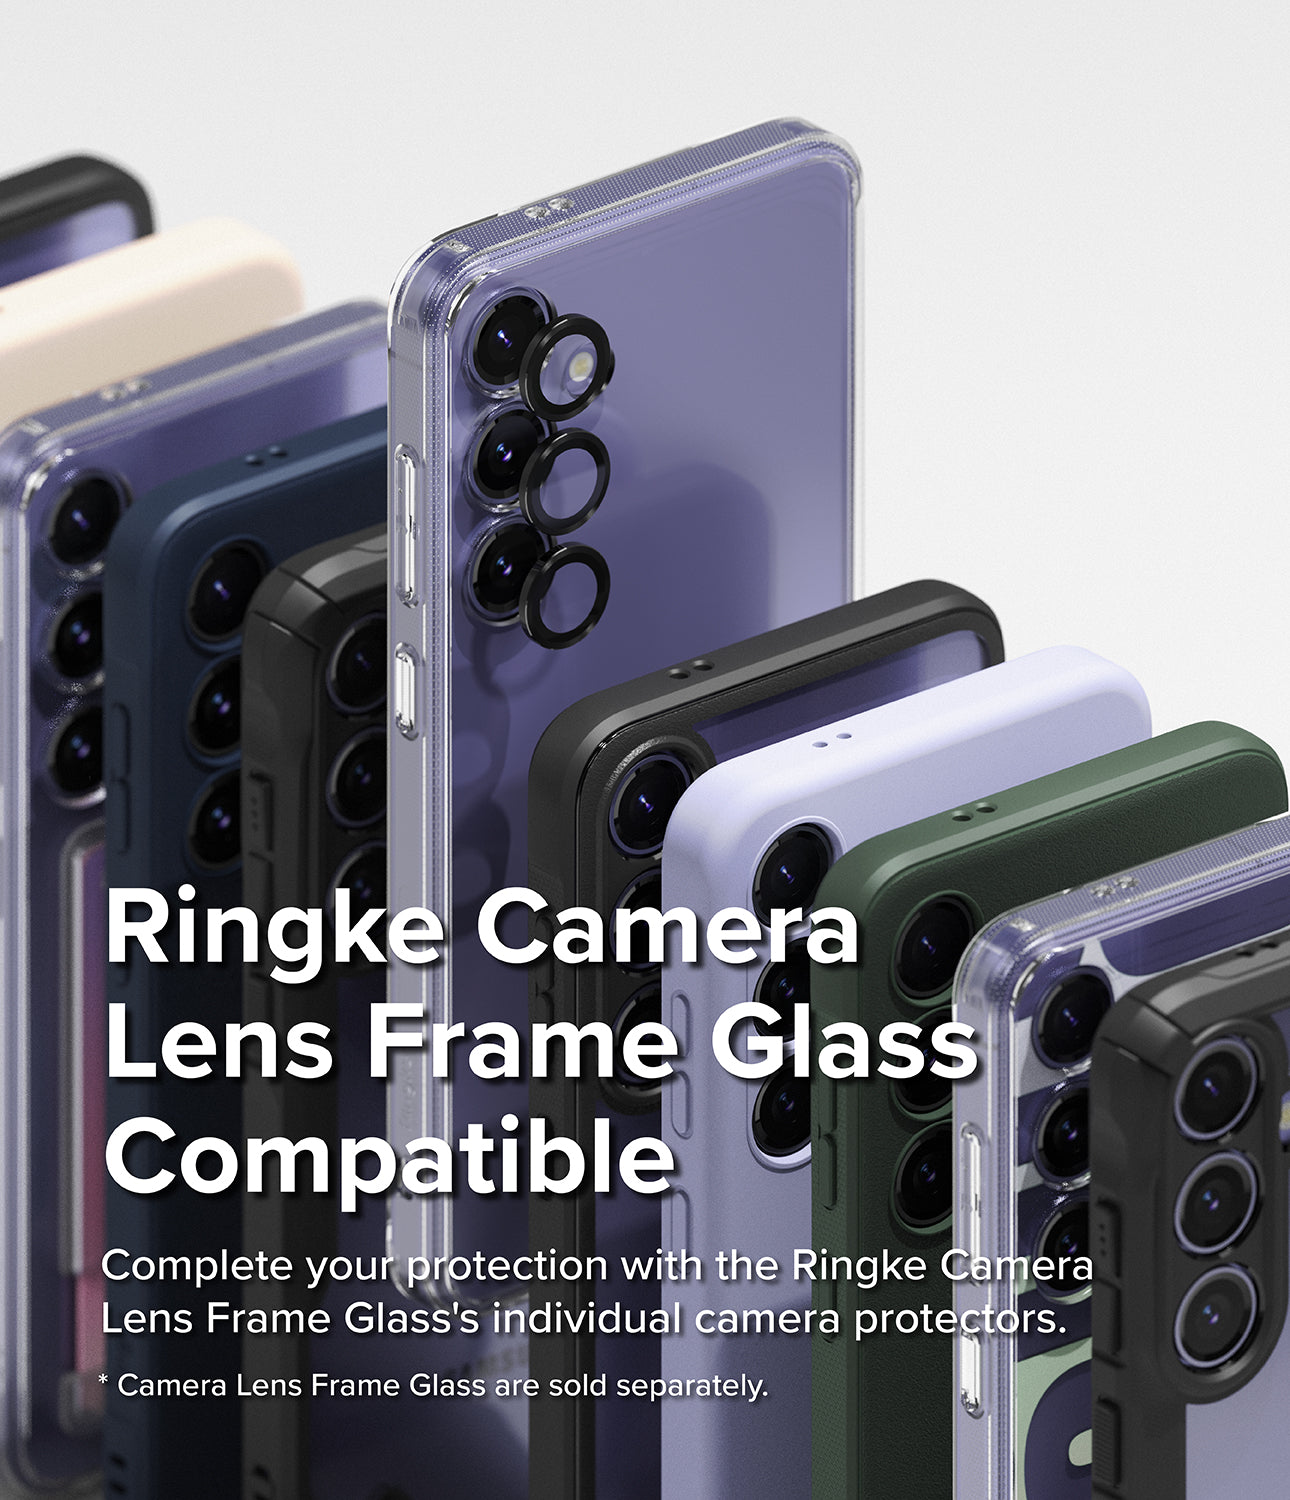 Galaxy S24 Case | Fusion - Ringke Camera Lens Frame Glass Compatible. Complete your protection with the Ringke Camera Lens Frame Glass' individual camera protectors.